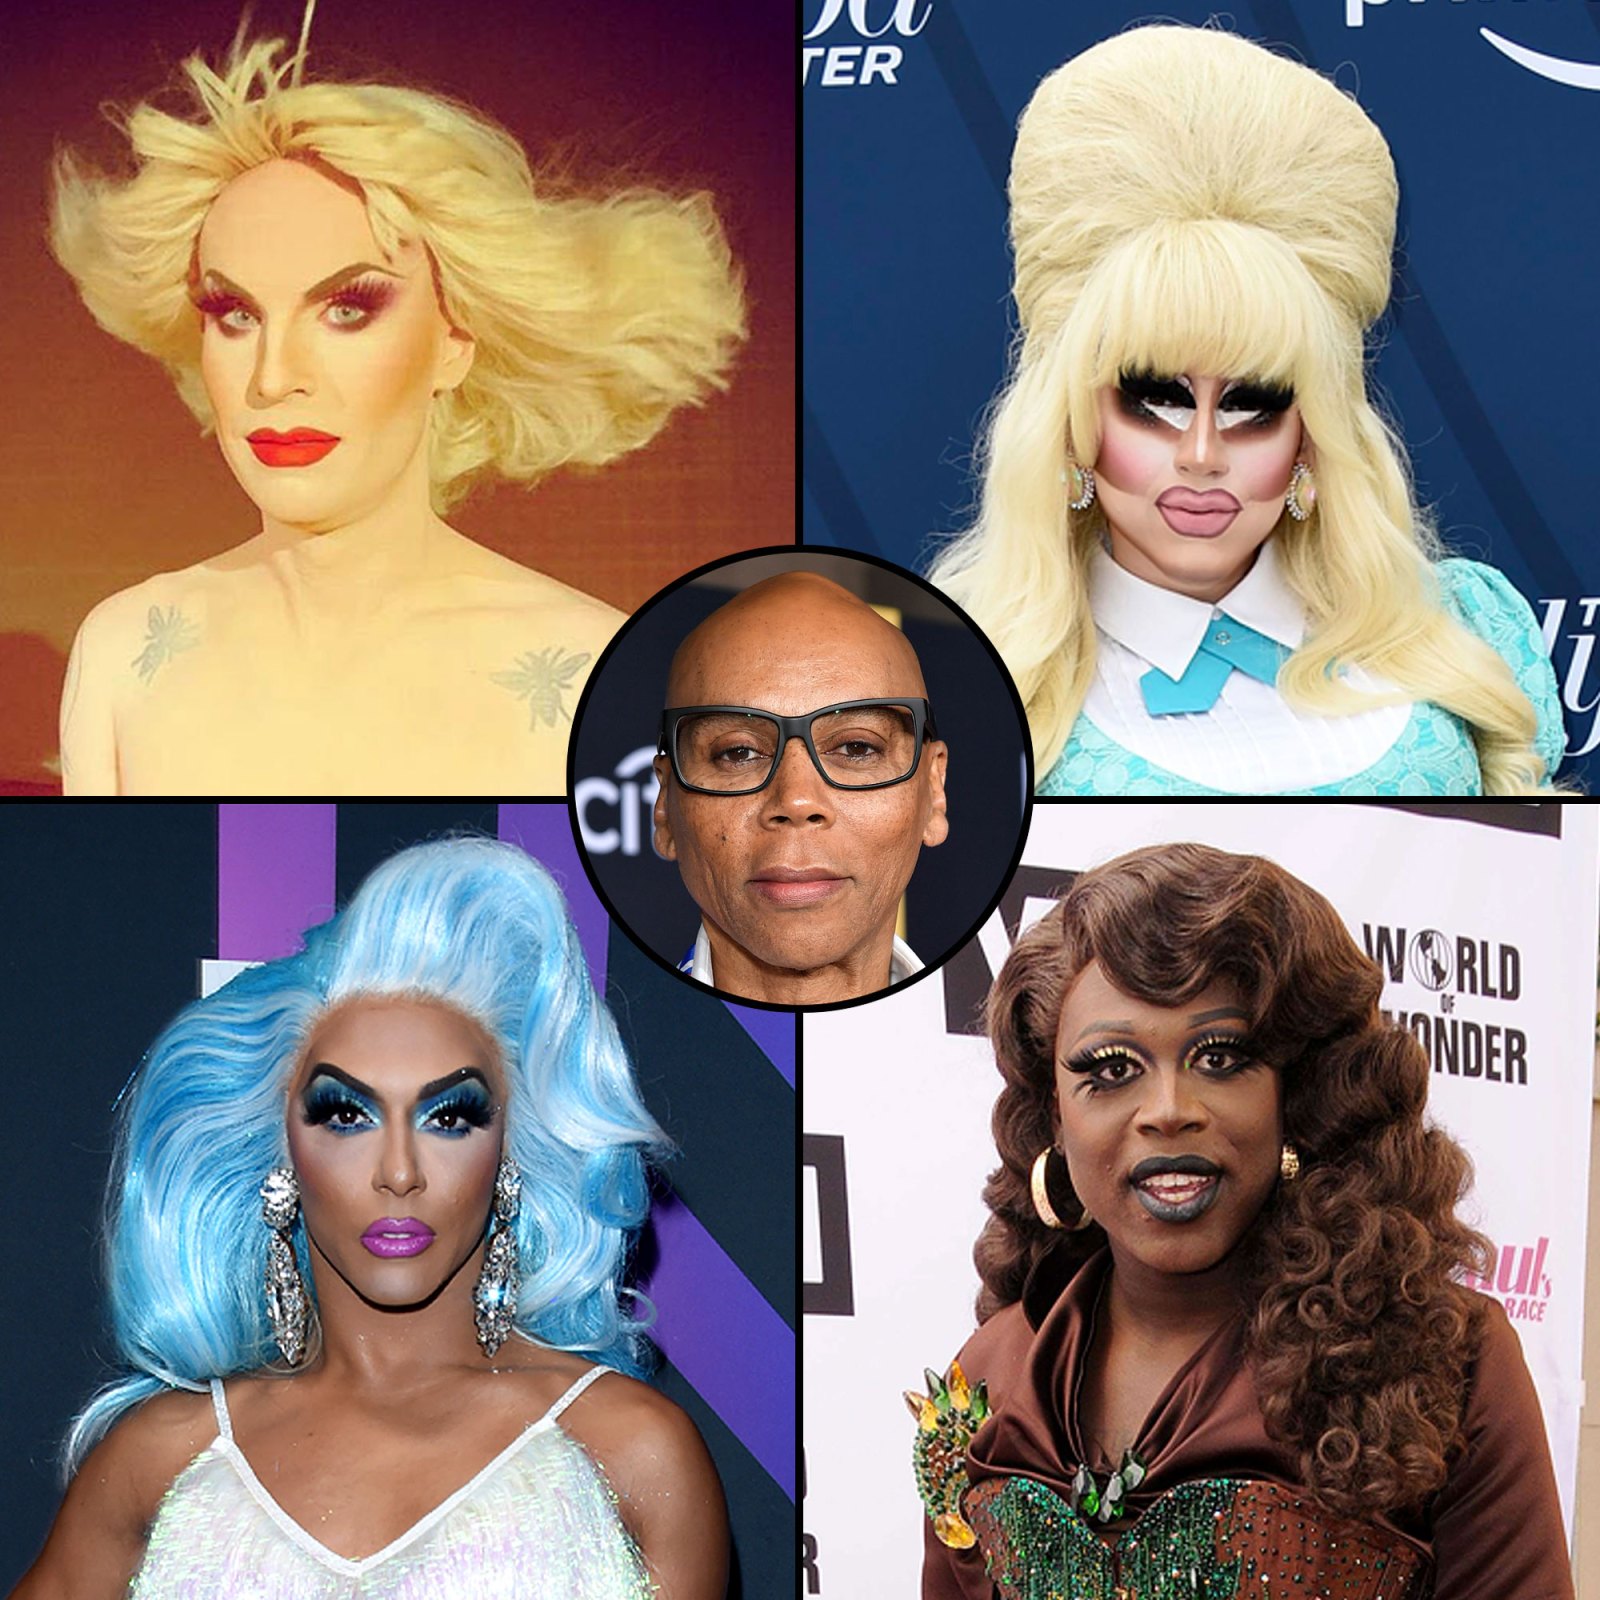 RuPaul's Drag Race' Where Are They Now?